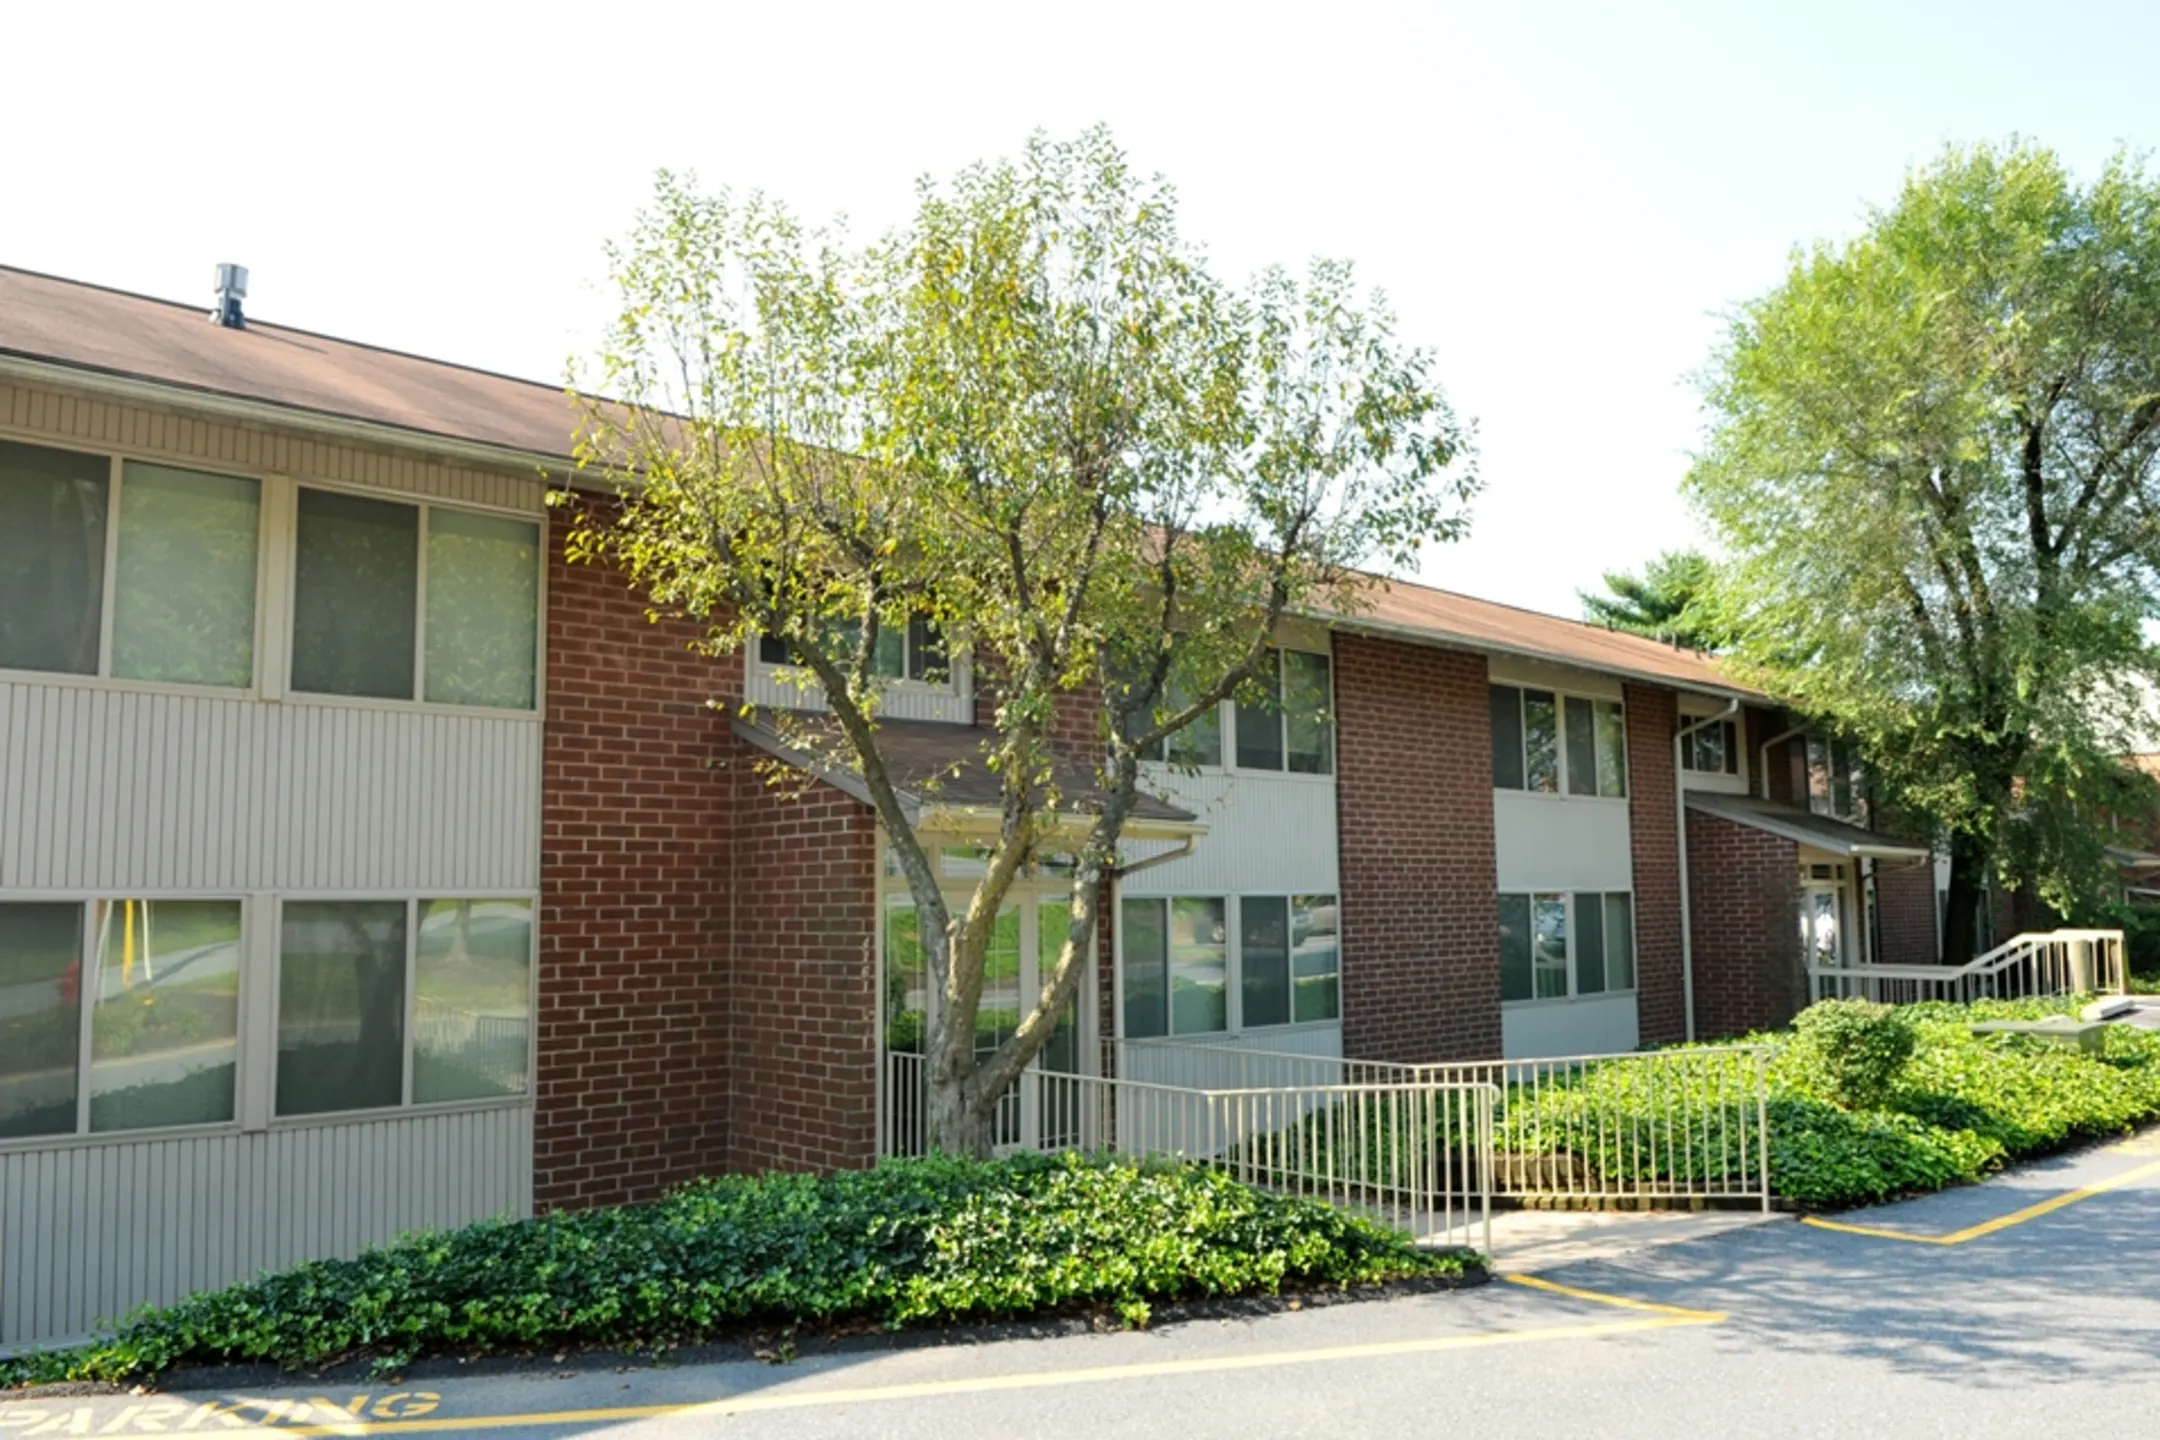 Building - Spring Valley Apartments - Harrisburg, PA